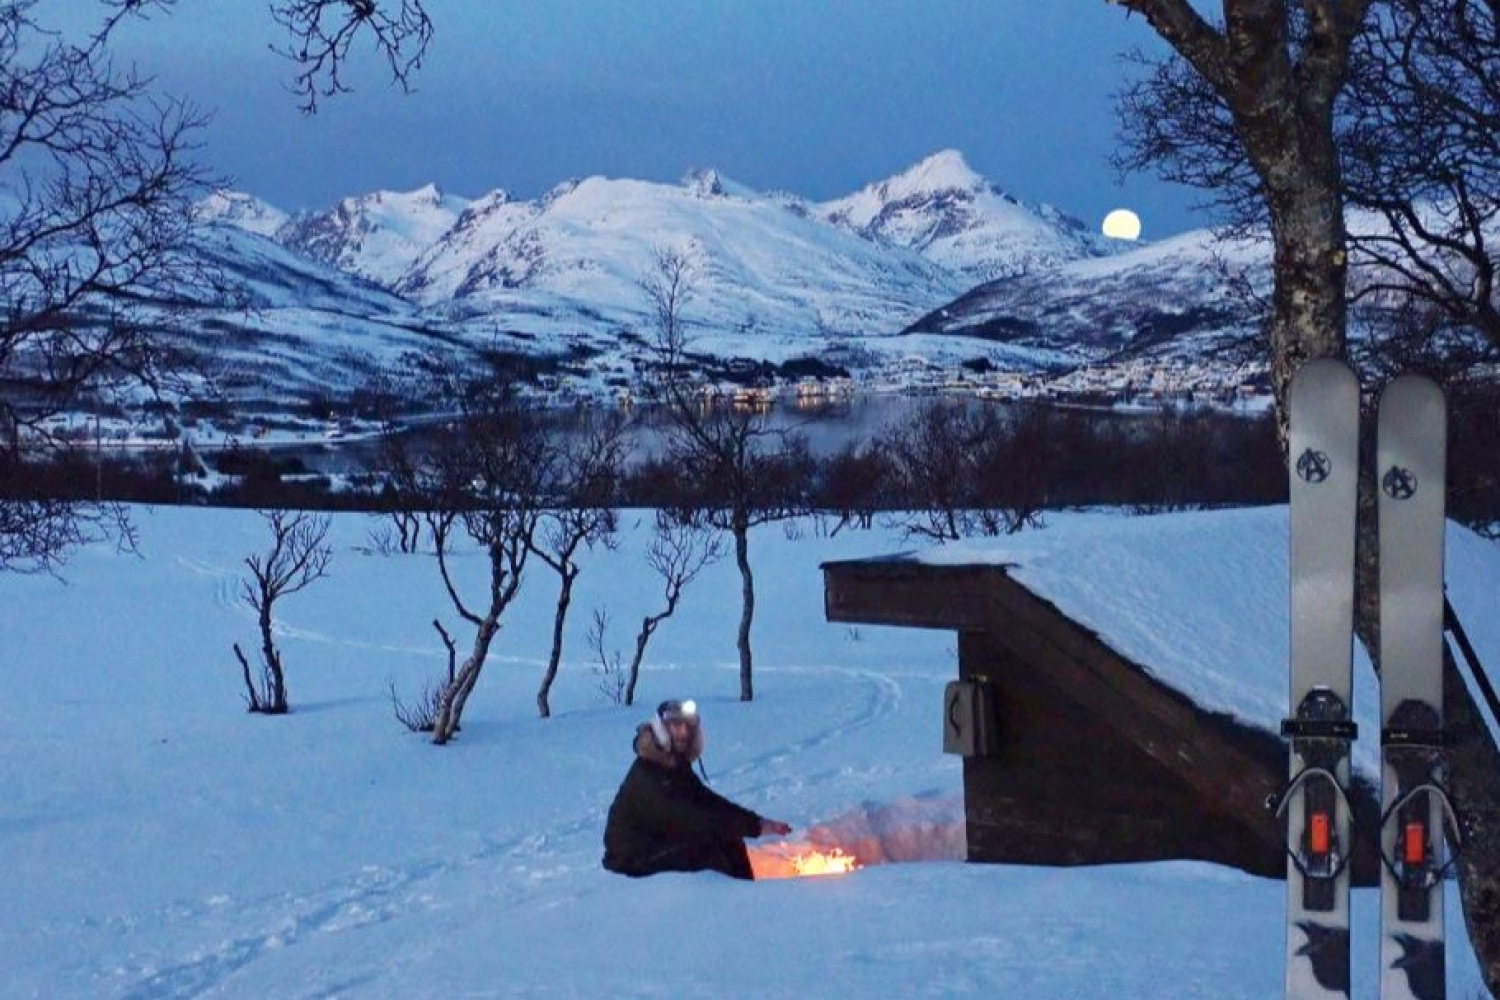 Moon behind mountains whilst person enjoying bonfire in the snow